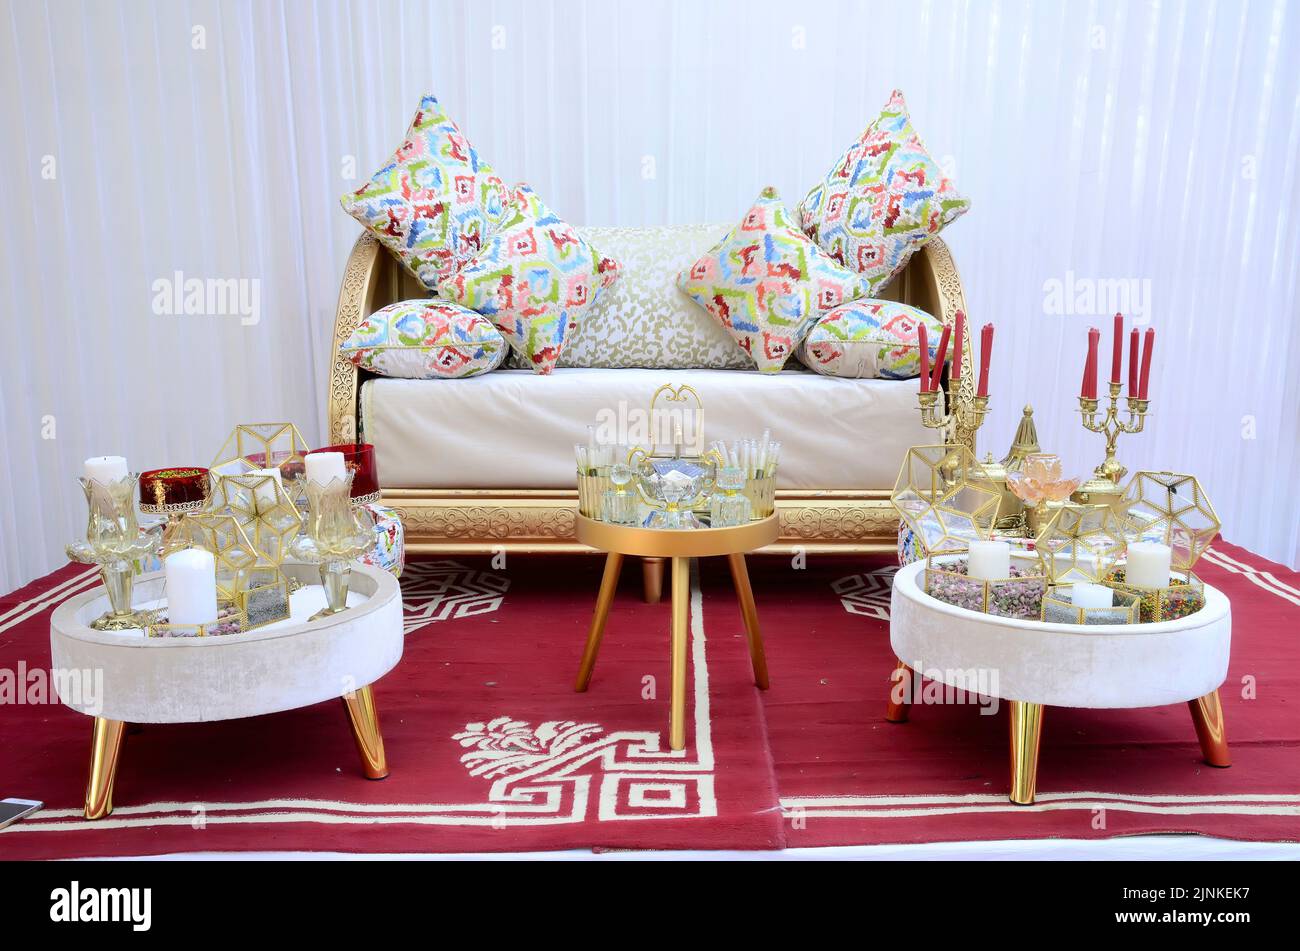 Traditional Moroccan wedding sofa where the bride sits for henna tattoo Stock Photo